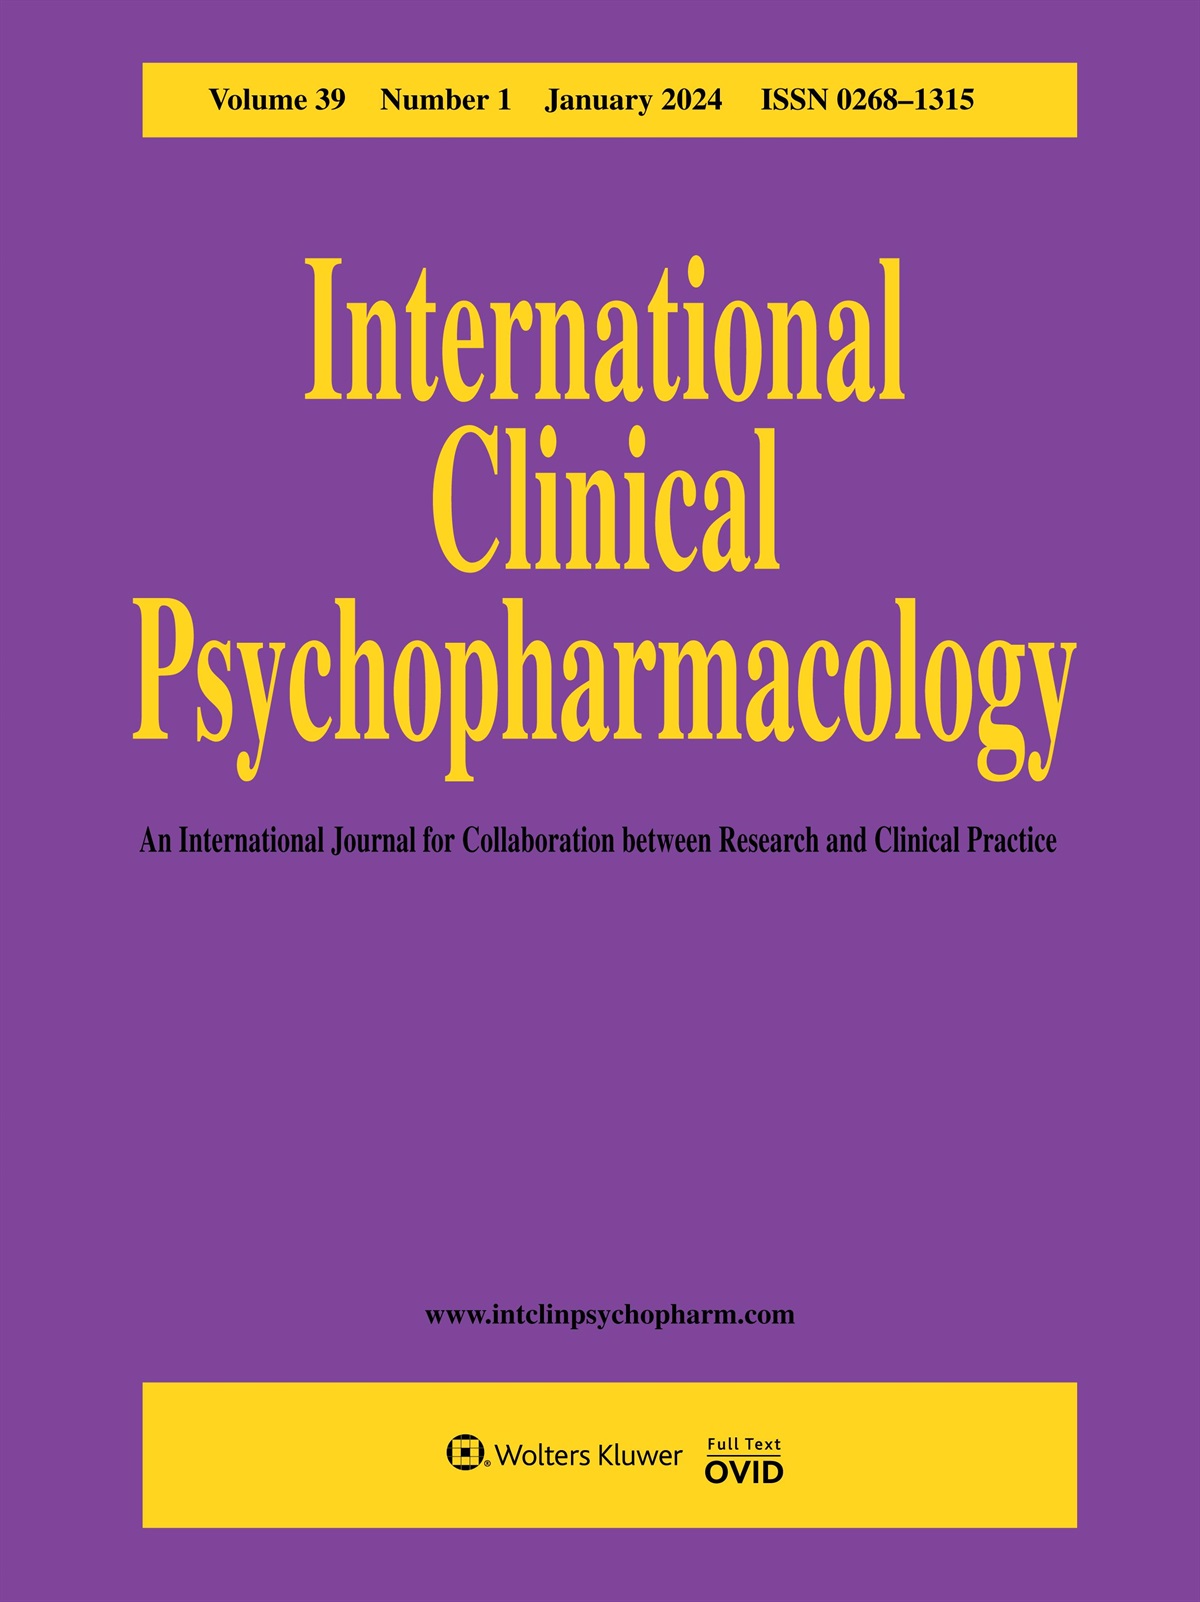 Focus on antipsychotics and related therapeutic drug monitoring